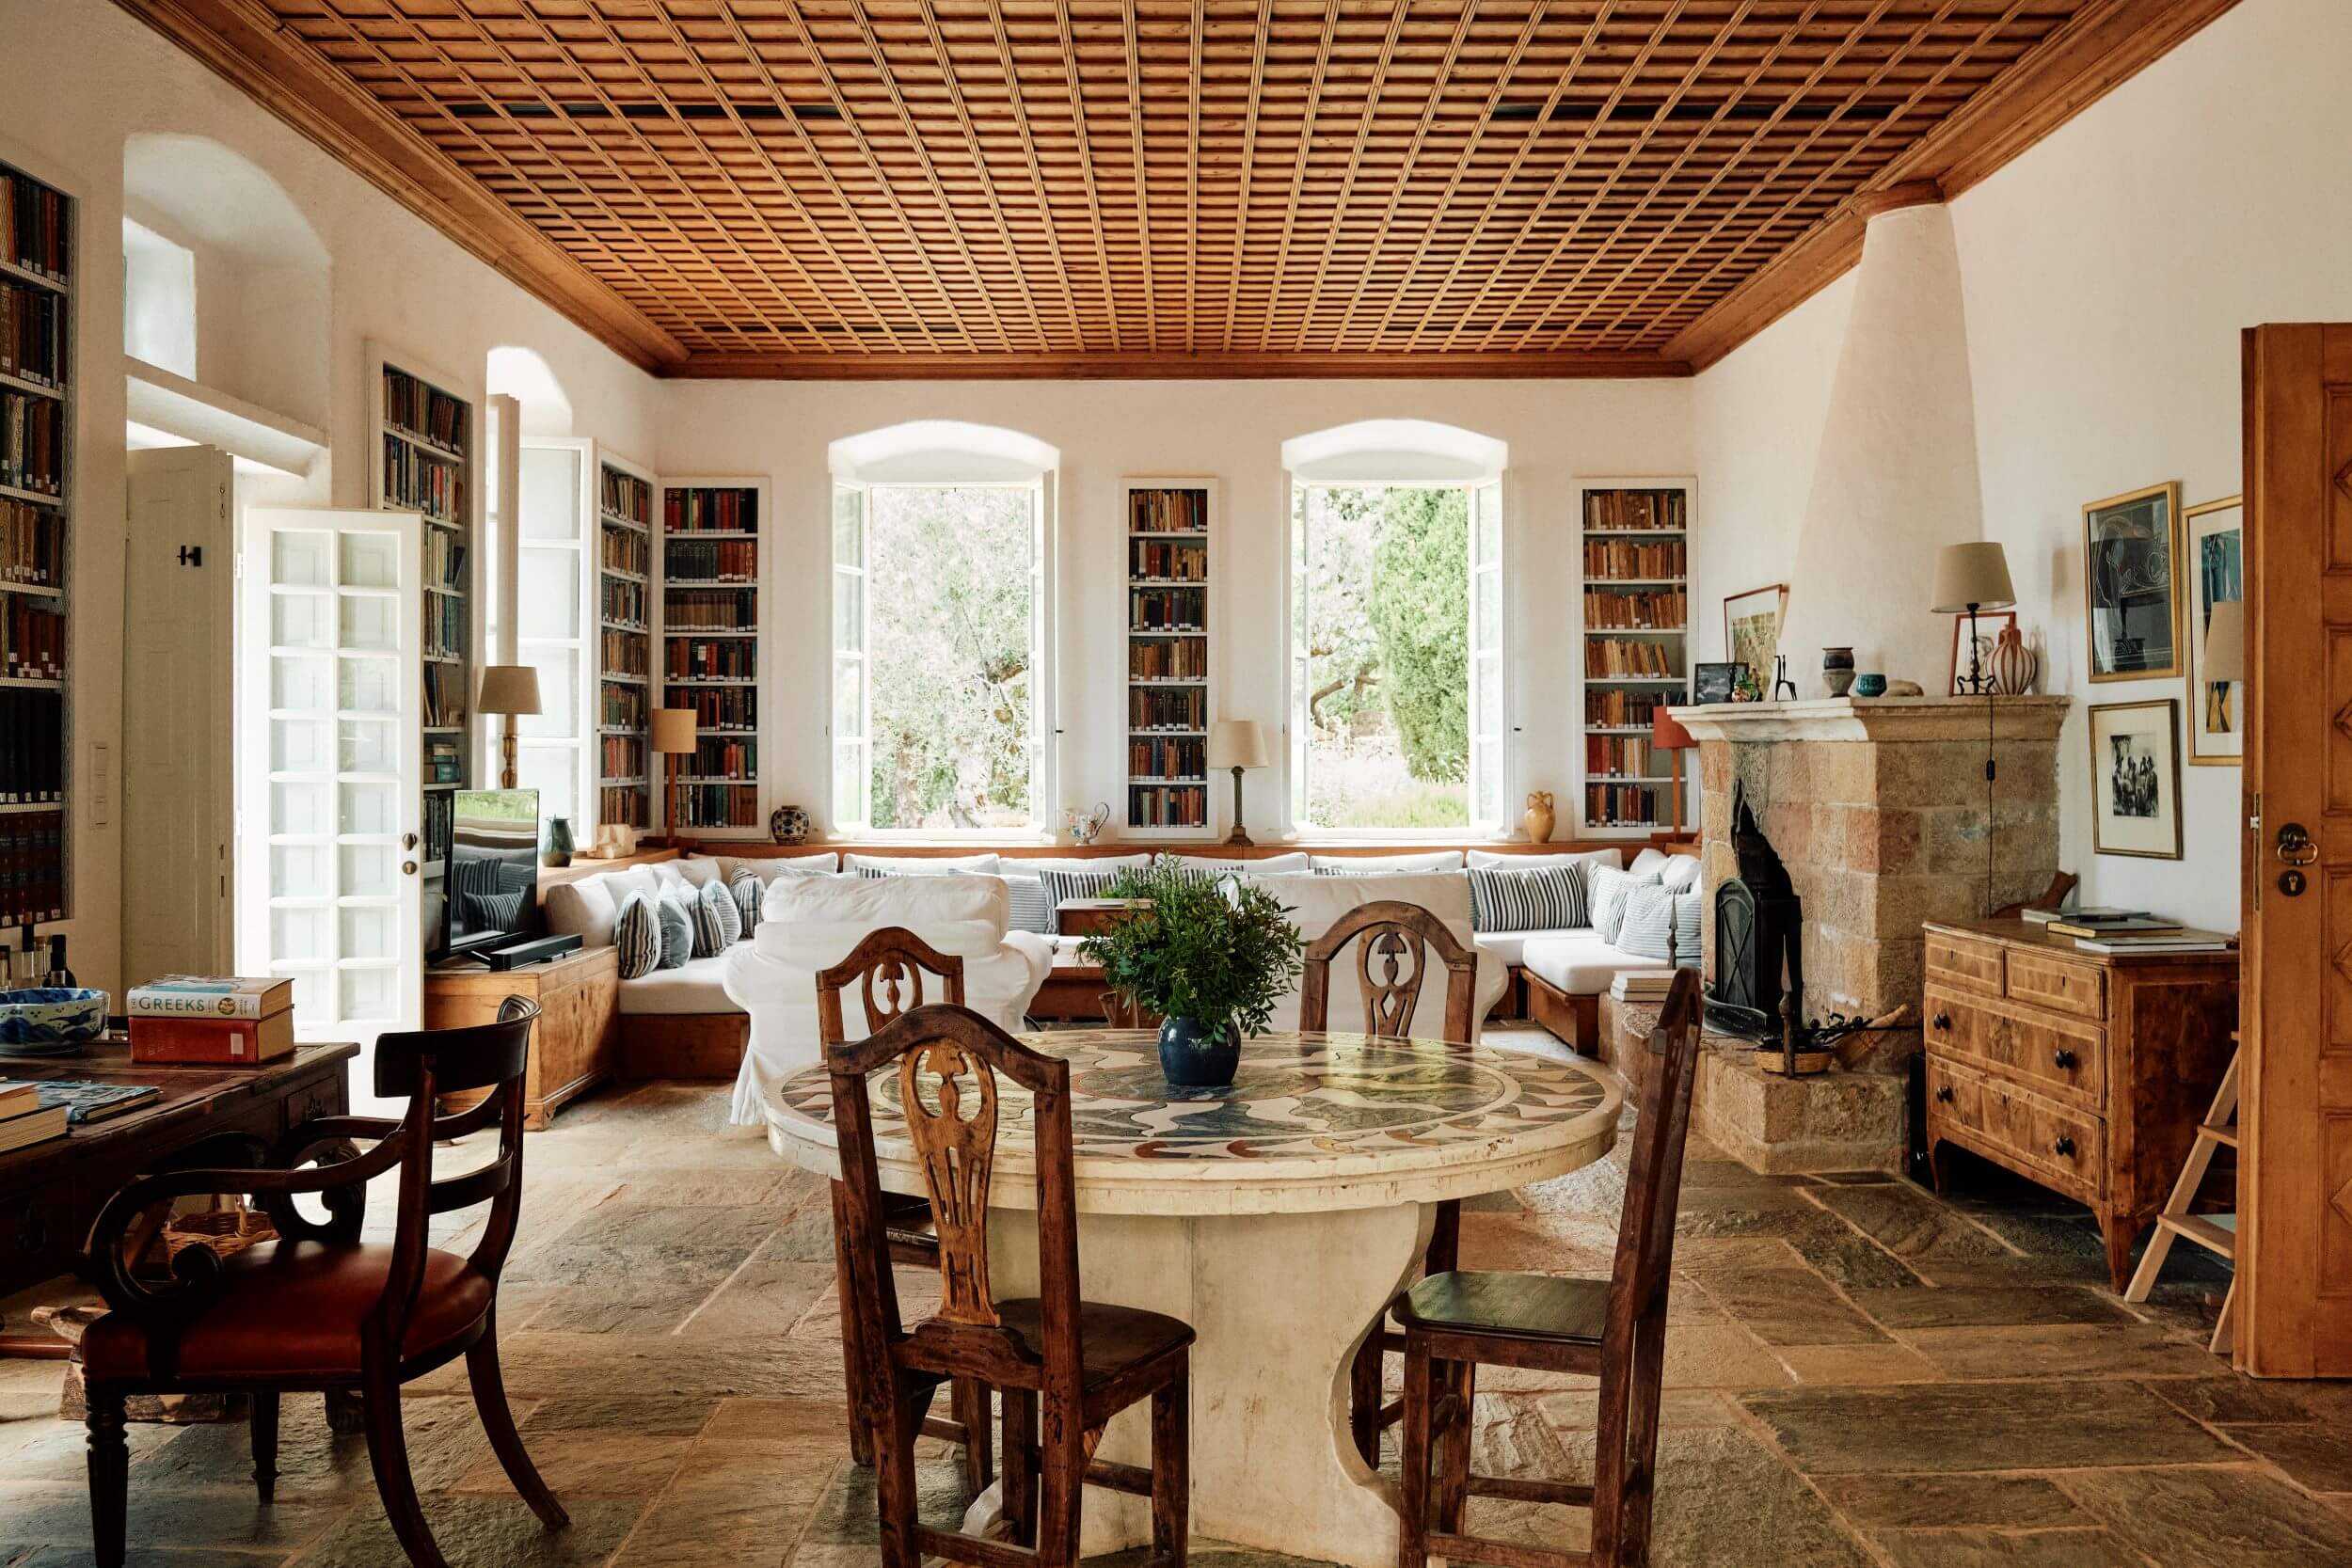 The library at Patrick Leigh Fermor's house in Kardamyli in the Mani, Greece, visited by Slow Cyclists